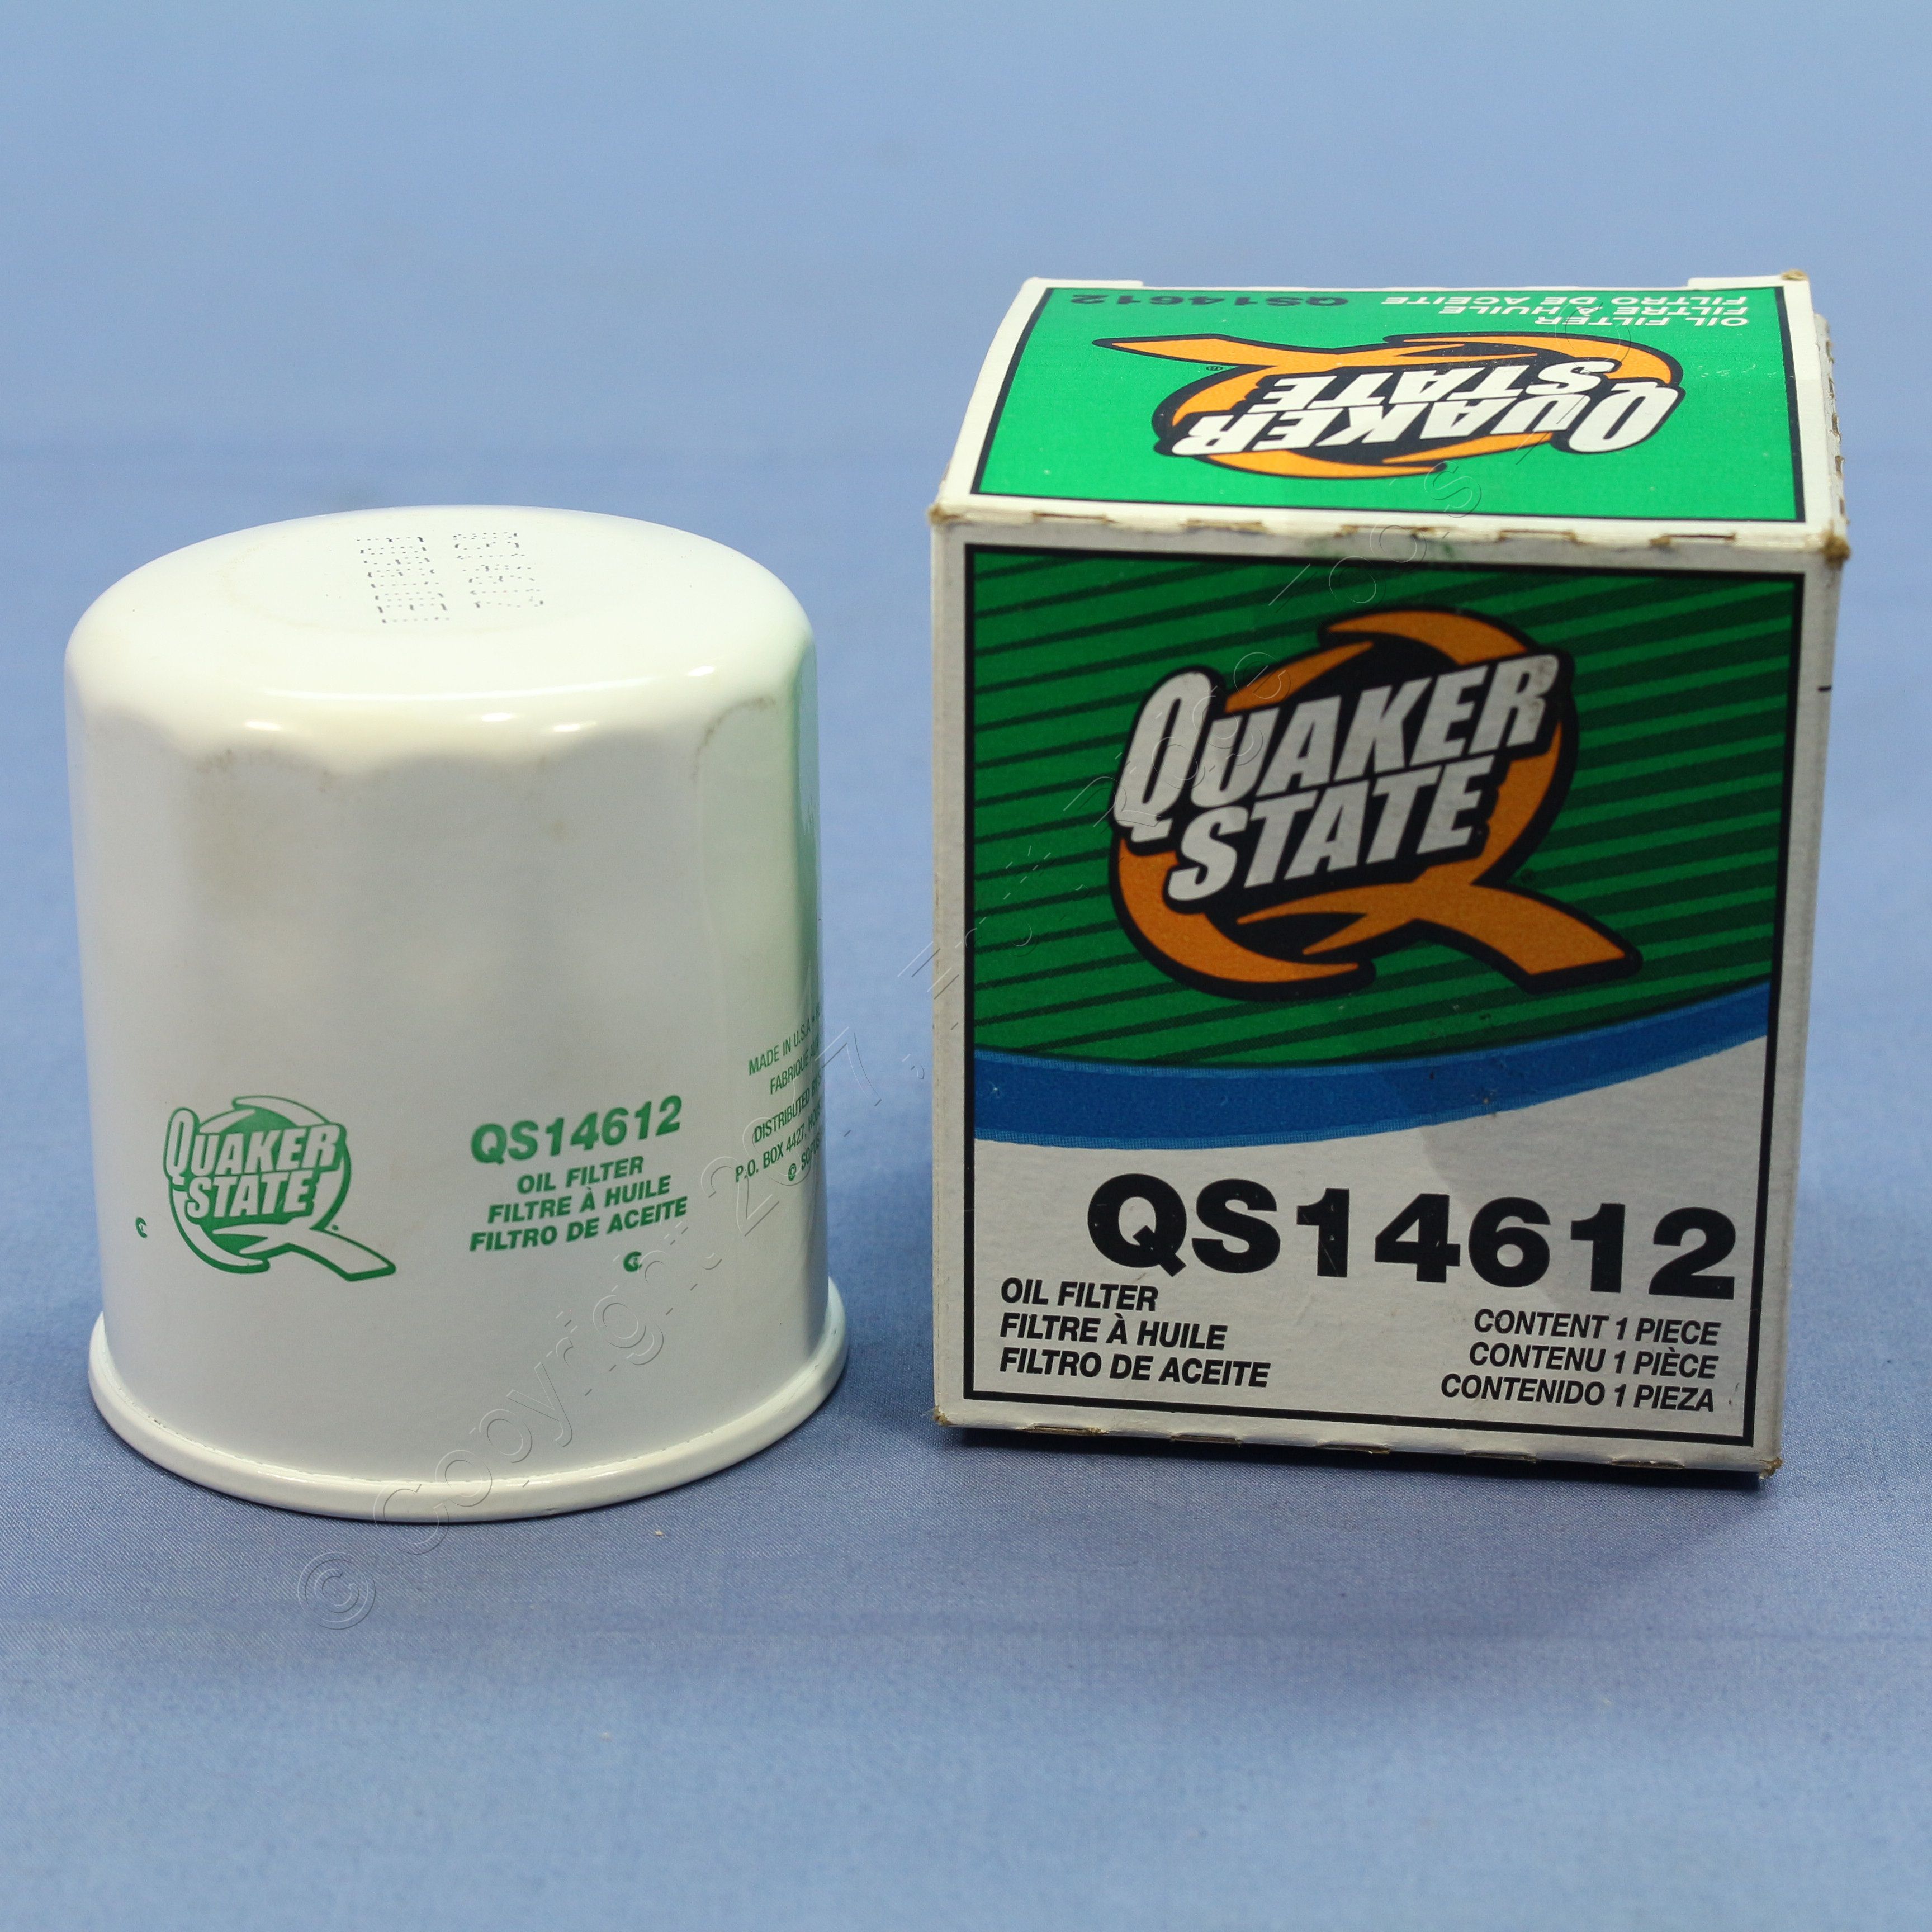 Details about New Quaker State QS14612 Engine Oil Filter Replacement